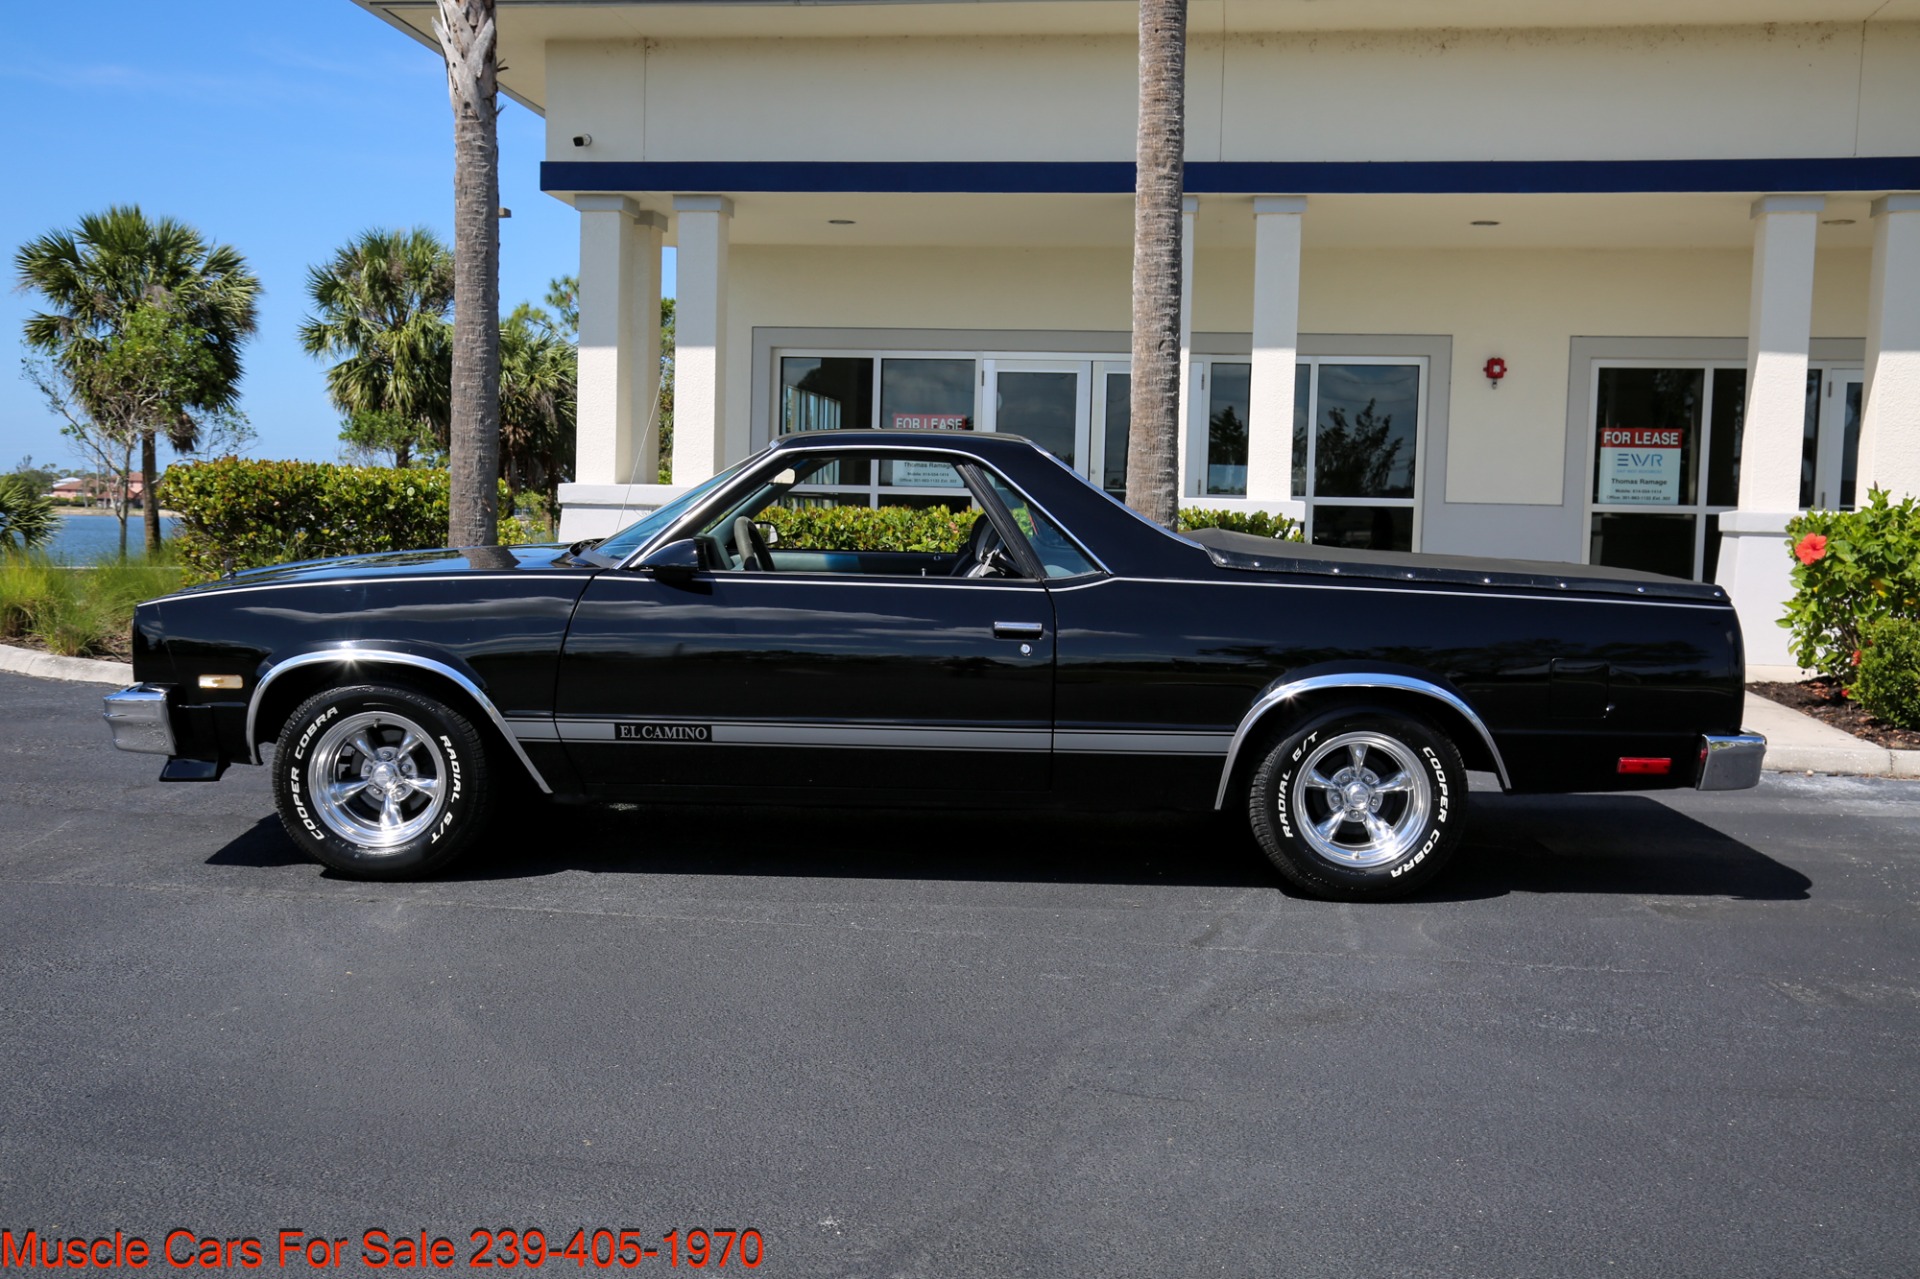 Used 1986 Chevrolet El Camino V8 Auto for sale $18,500 at Muscle Cars for Sale Inc. in Fort Myers FL 33912 8